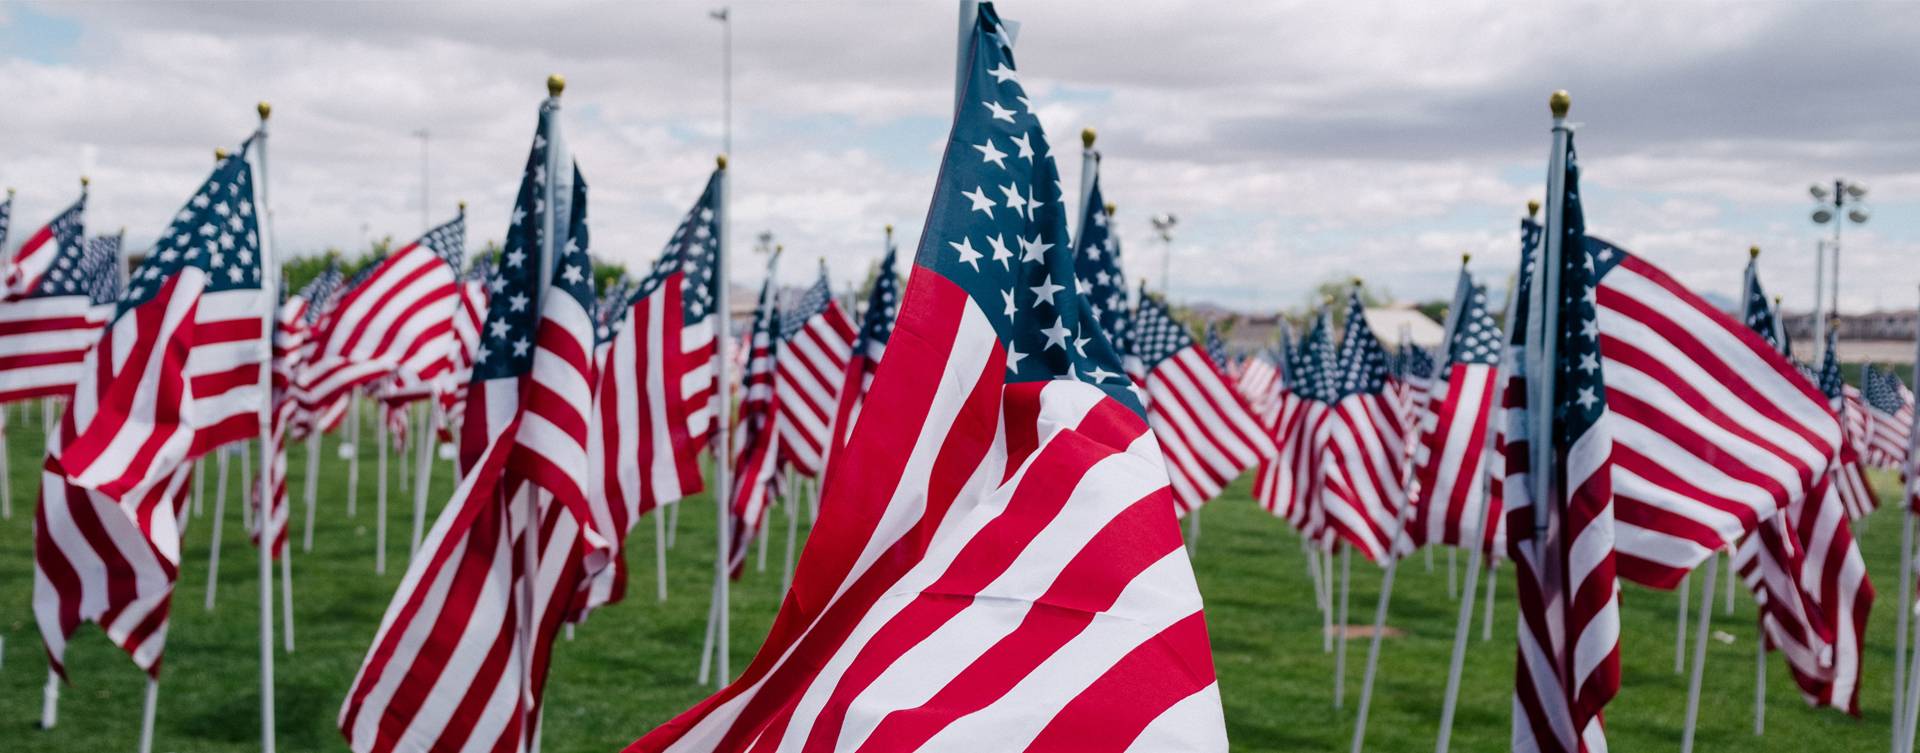 Group of American flags outdoors